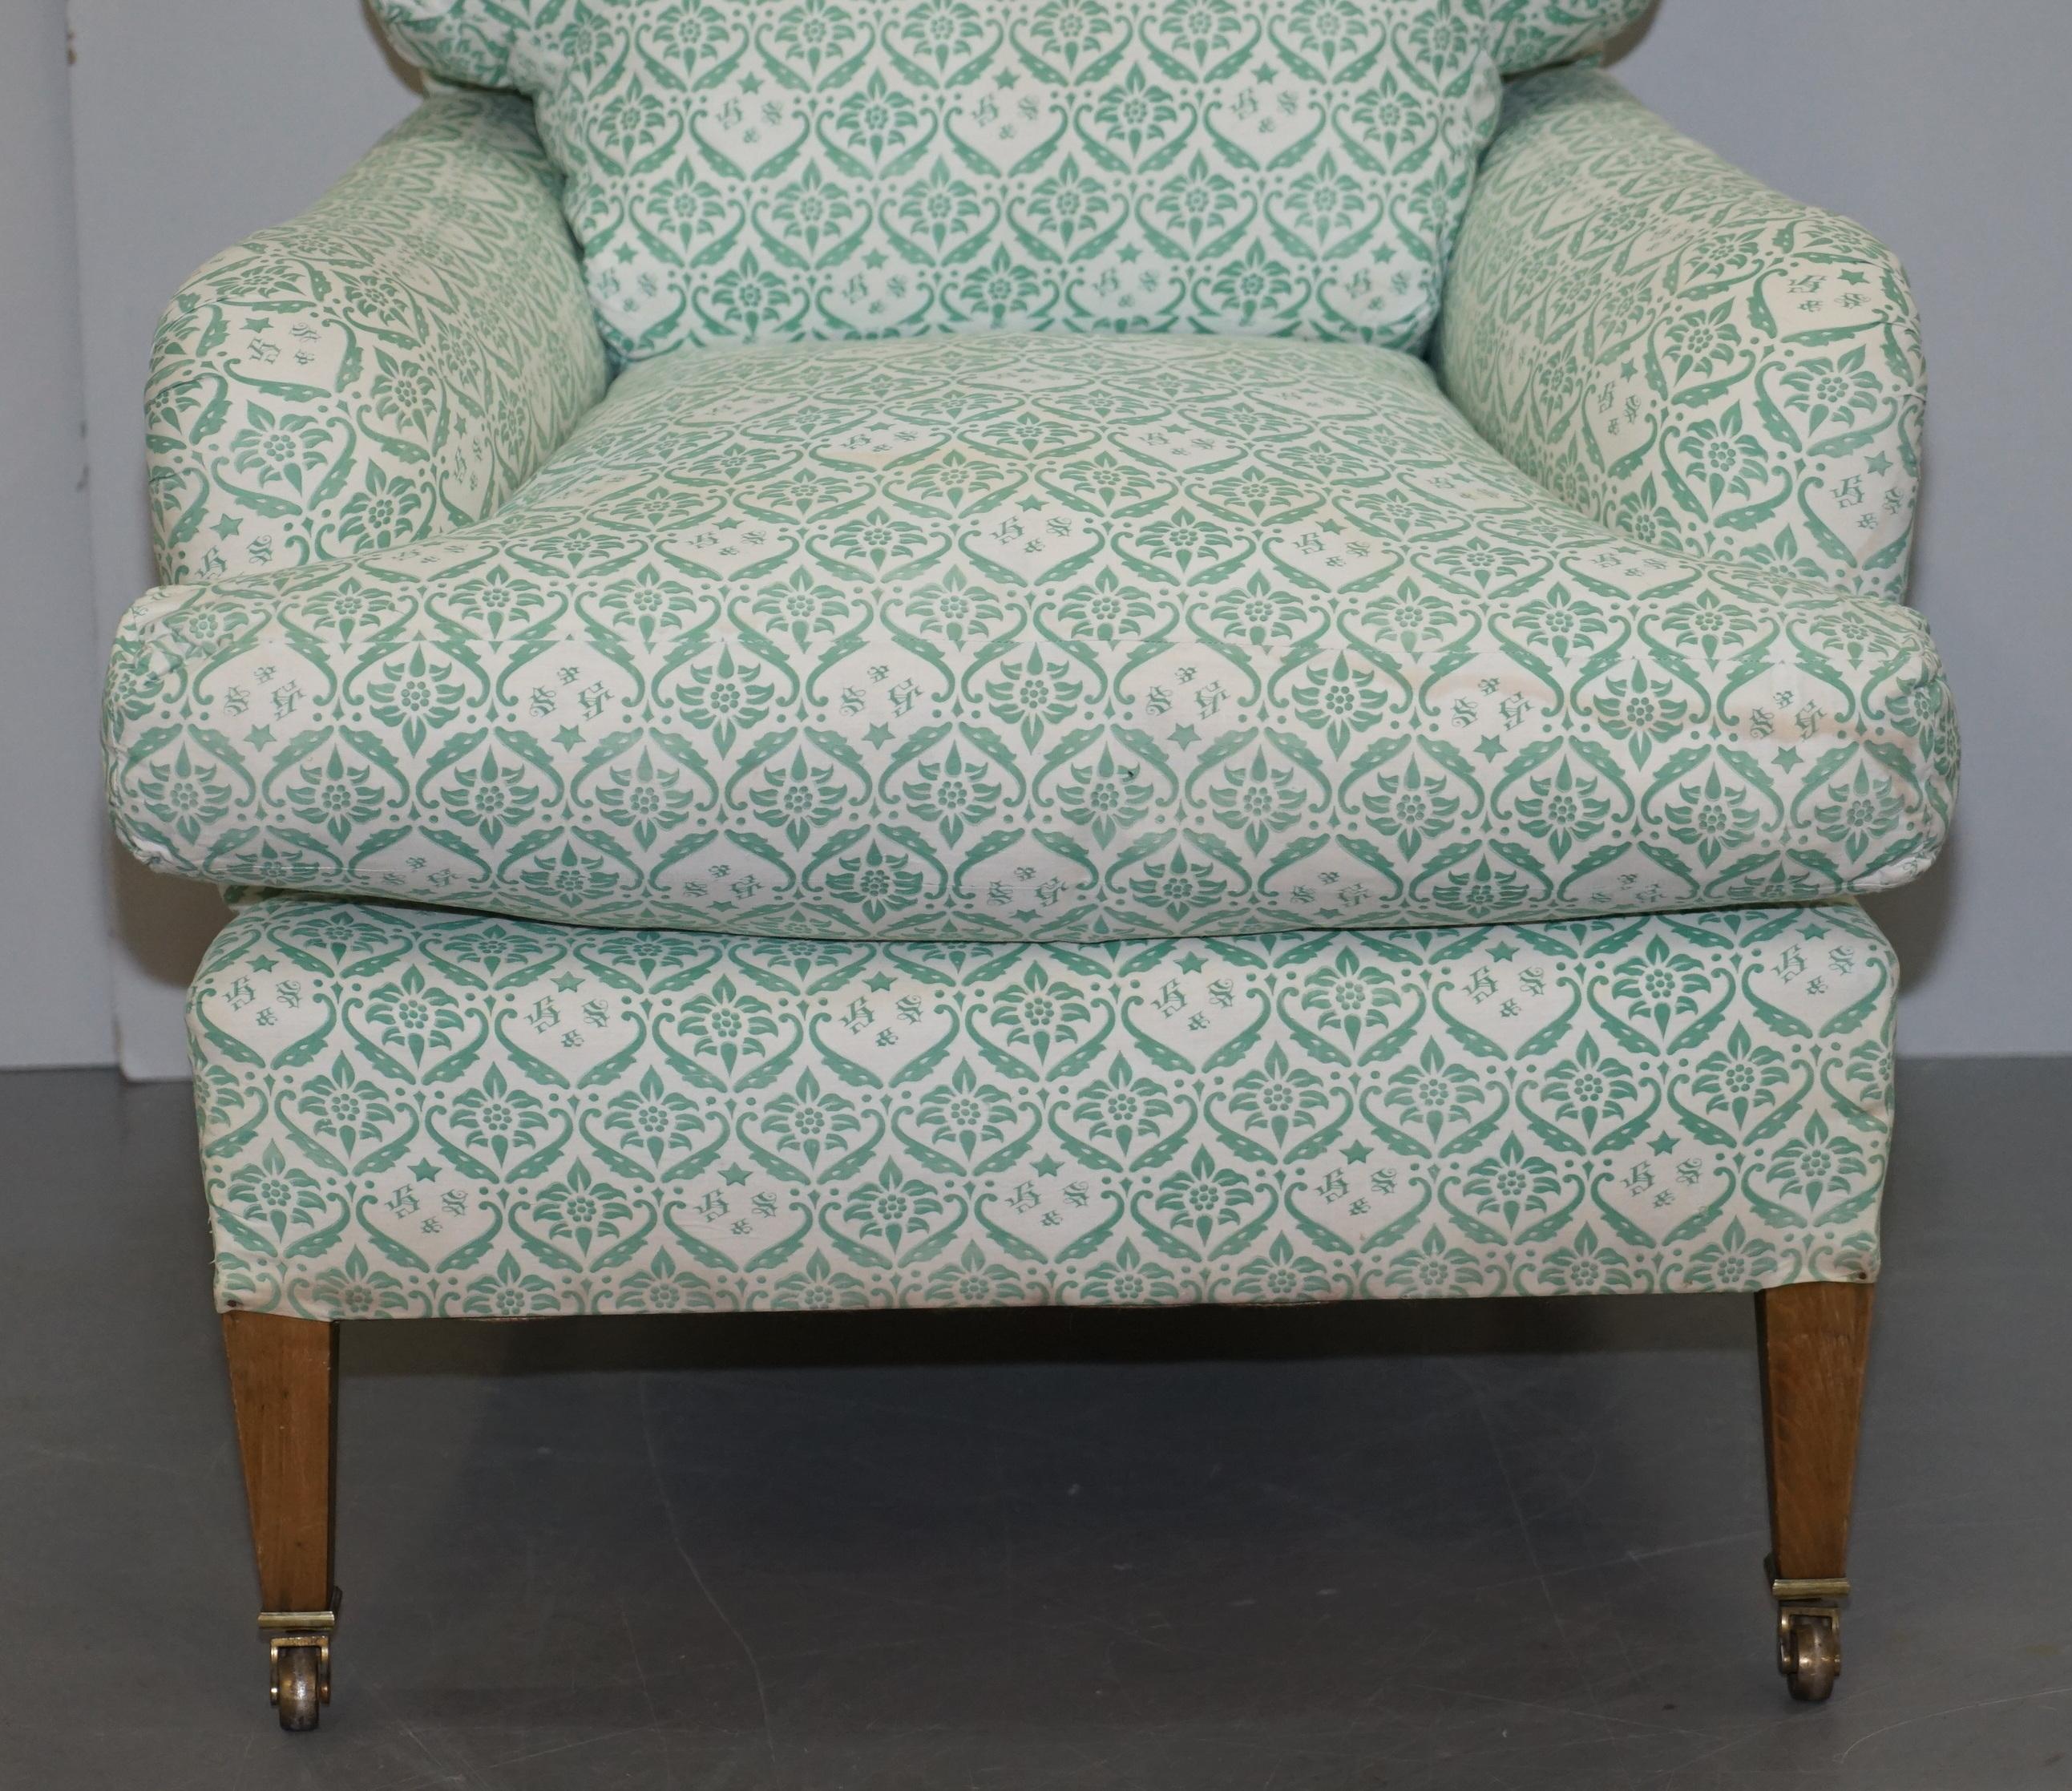 Hand-Crafted Rare 1954-1959 Howard & Son's Lenygon & Morant Armchair Original Ticking Fabric For Sale